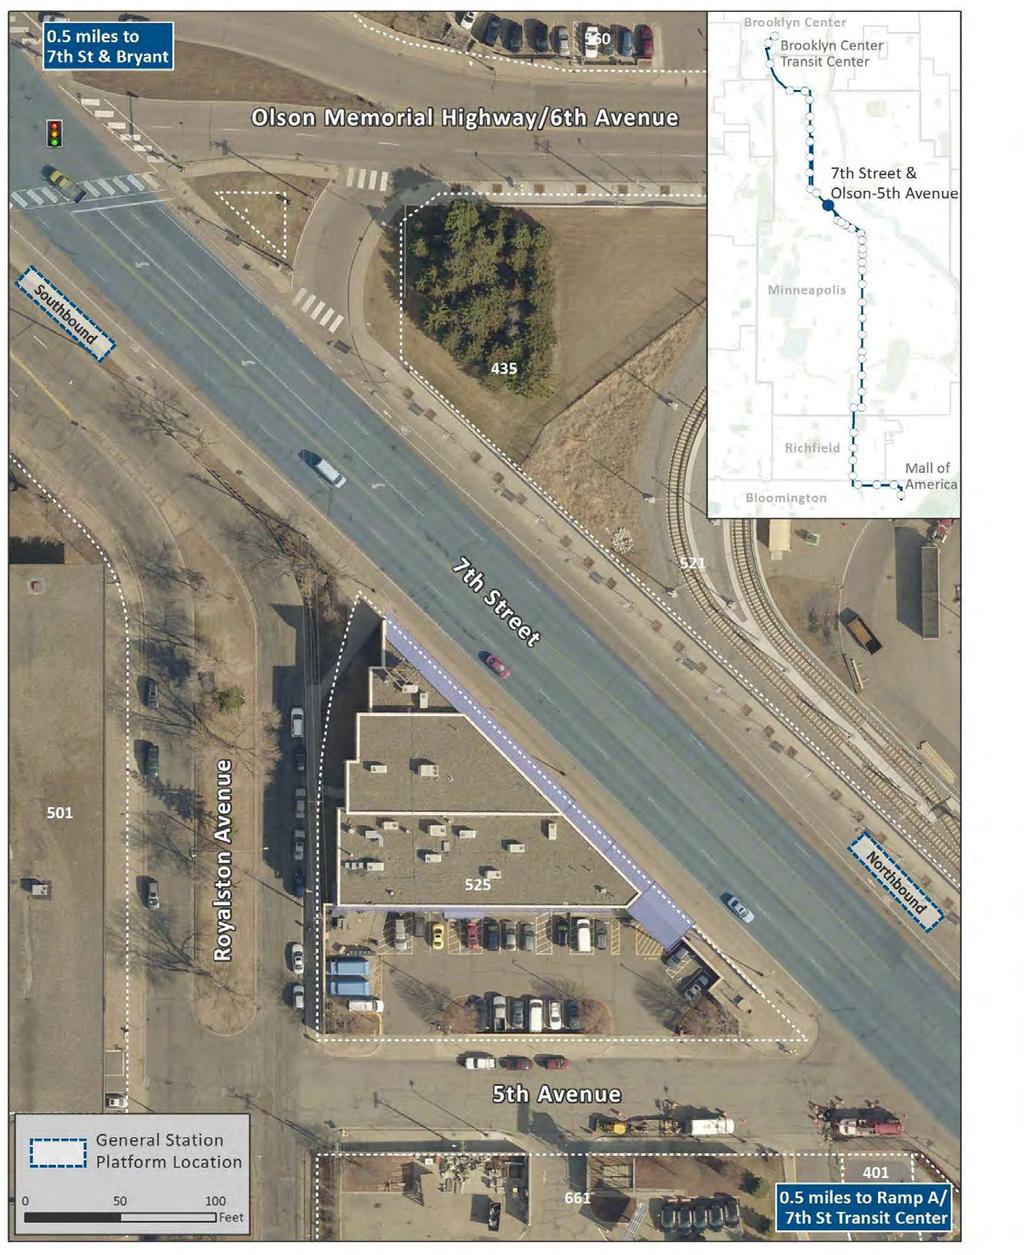 Figure 33: Recommended station location - 7th Street & Olson-5th